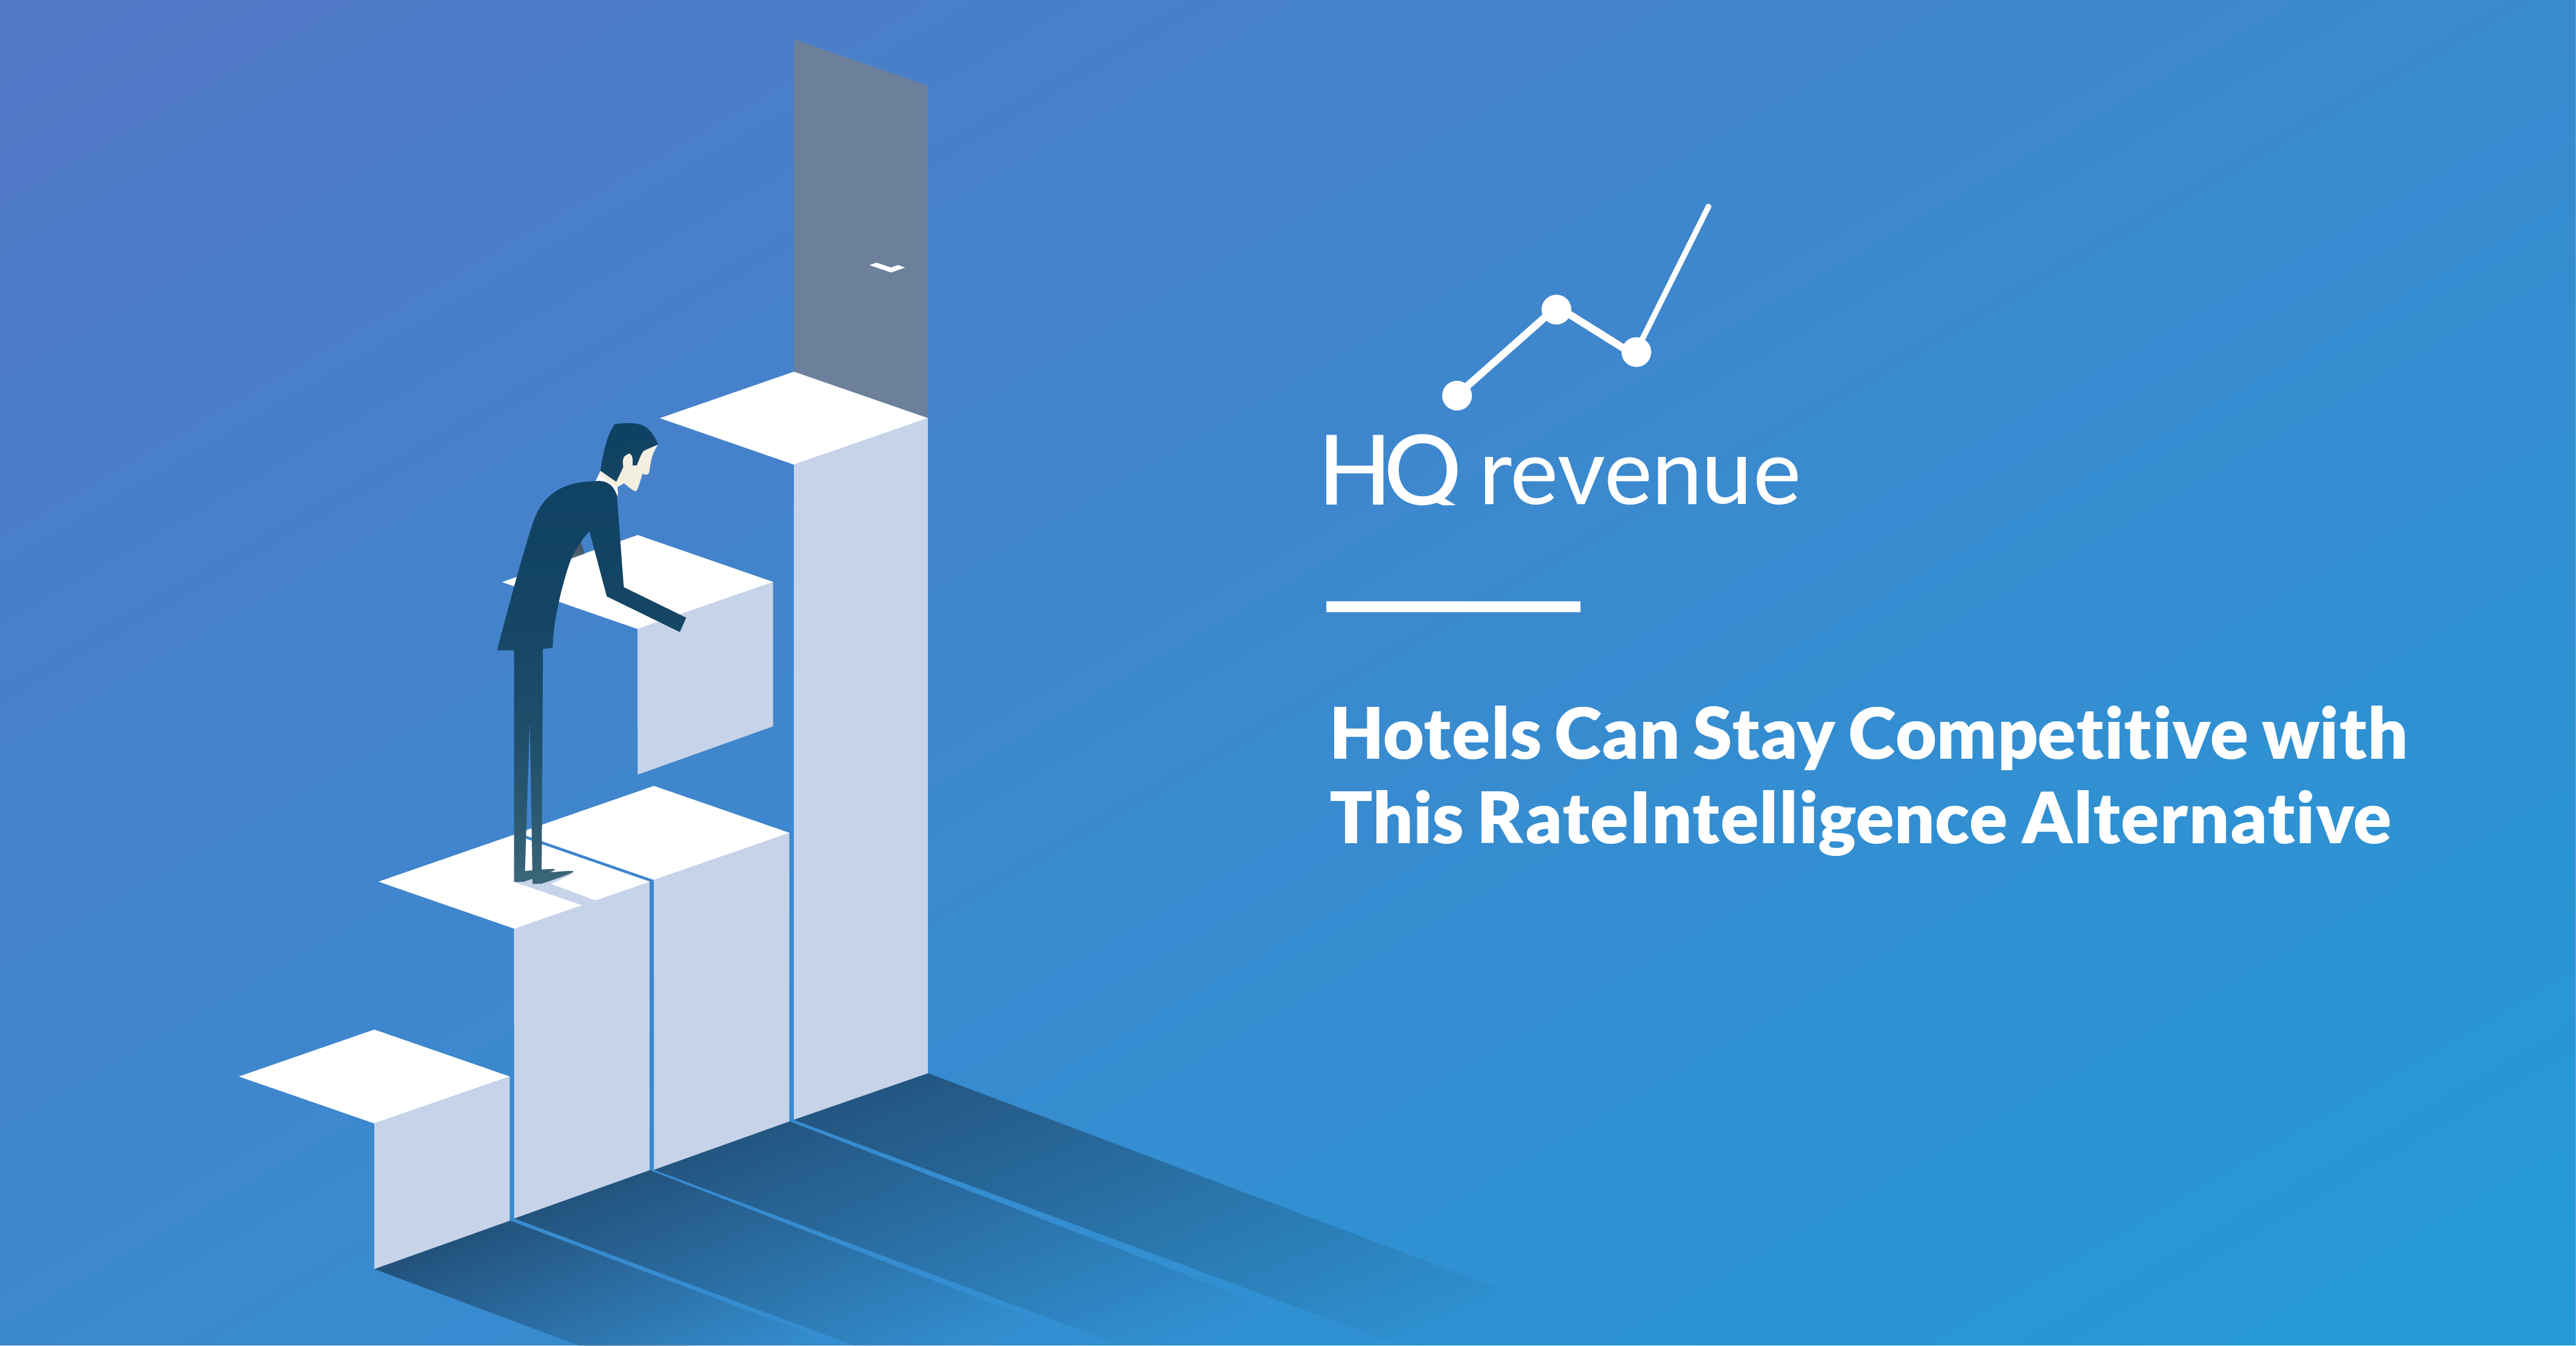 Hotels Can Stay Competitive with This RateIntelligence Alternative